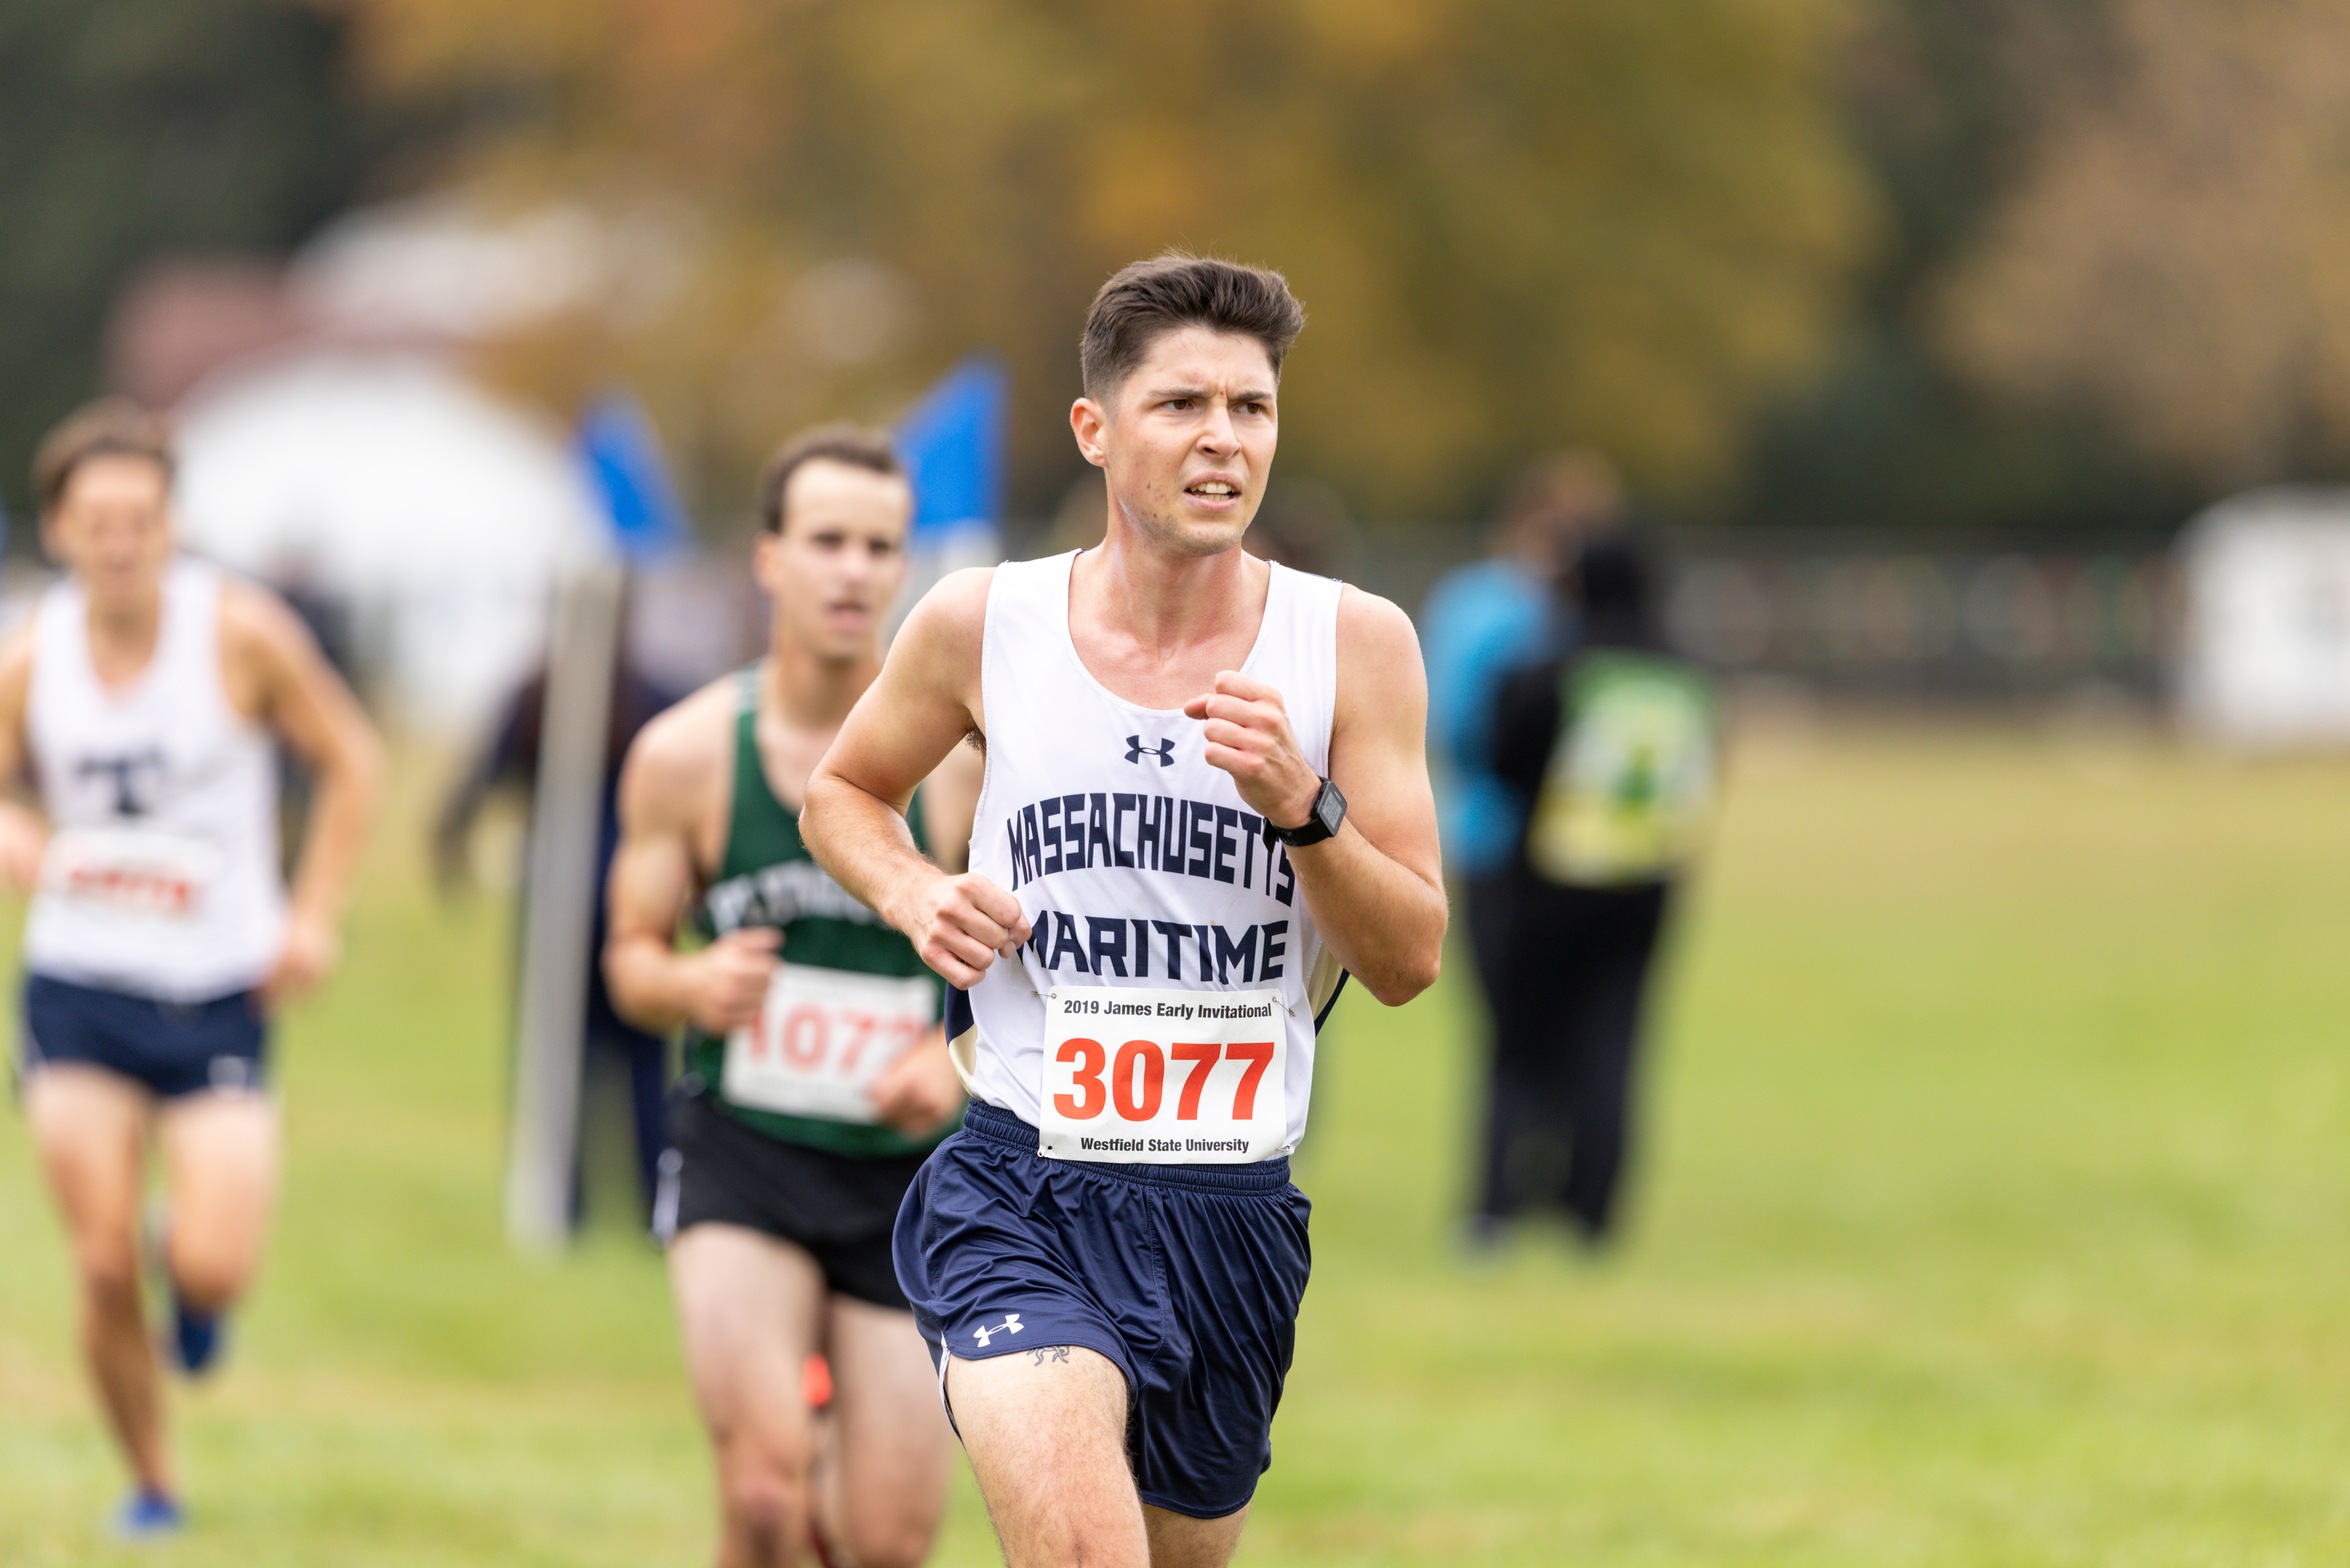 Bucs Run in James Earley Invite at Westfield State